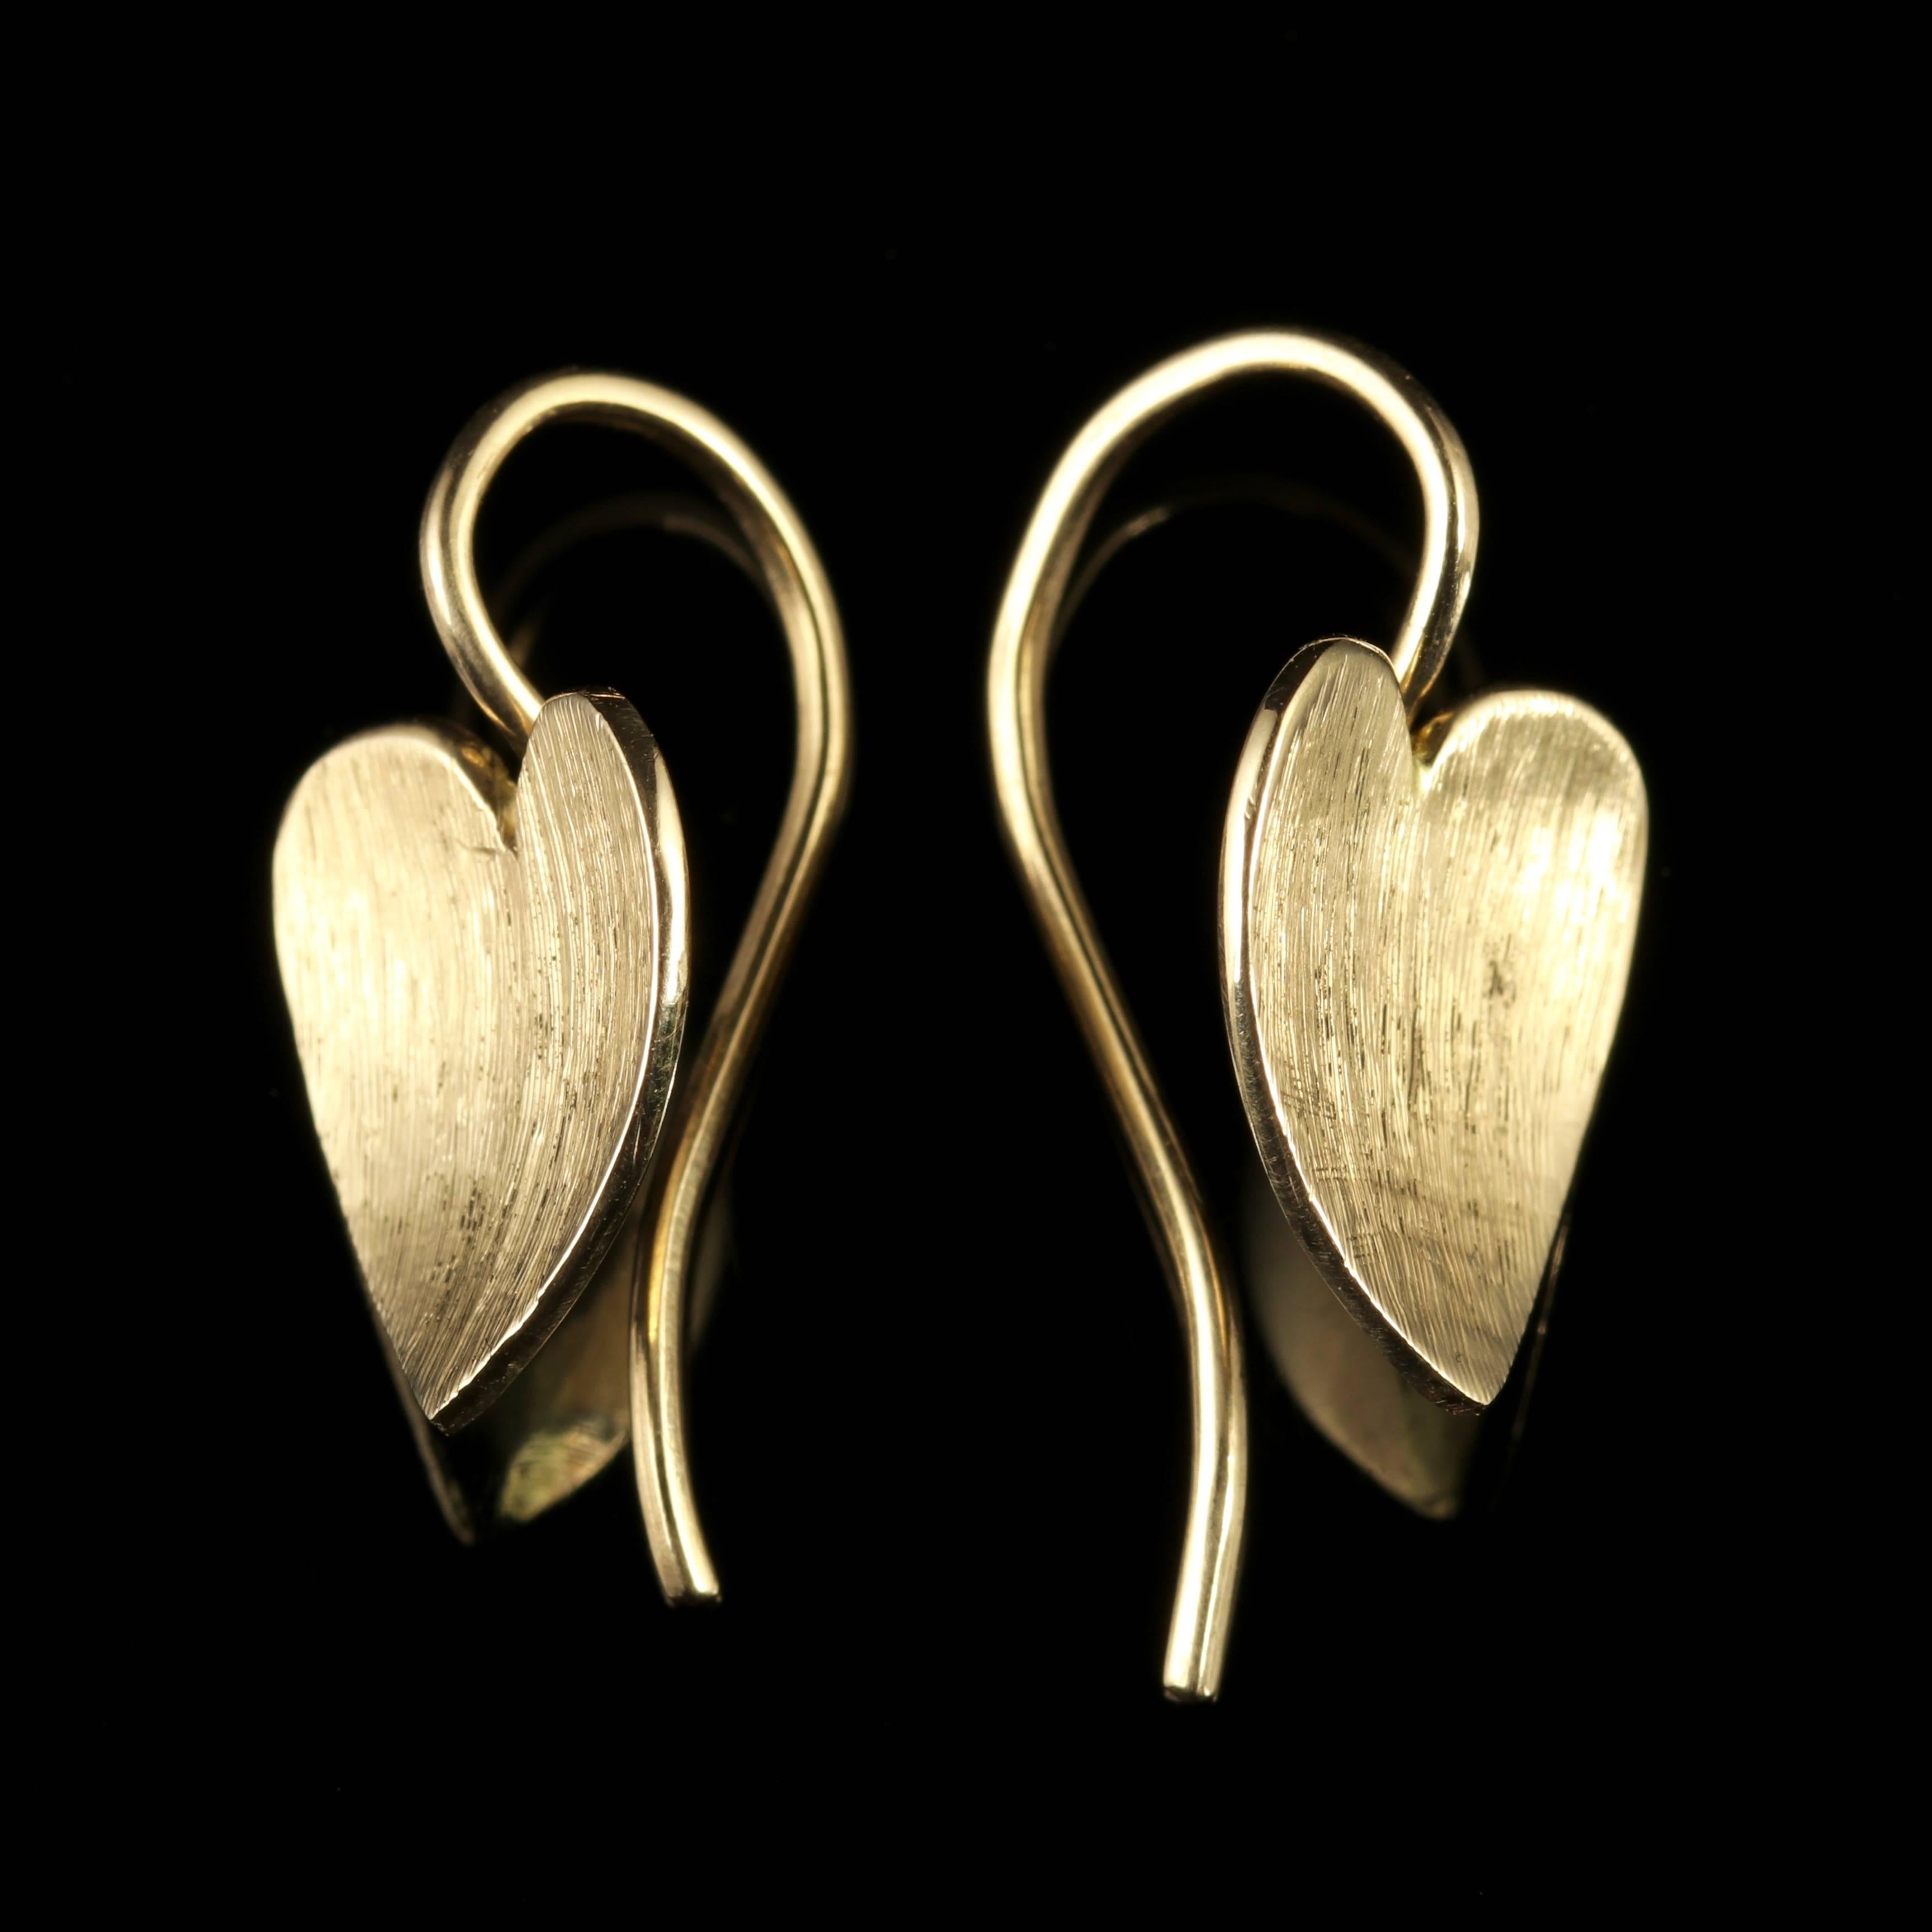 These beautiful Antique 9ct Rose Gold heart earrings are genuine Victorian, Circa 1900. 

Two beautiful polished hearts sit on each earring with a smooth matt finish that compliment the ear elegantly.

Hearts are a symbol of love and affection.

The